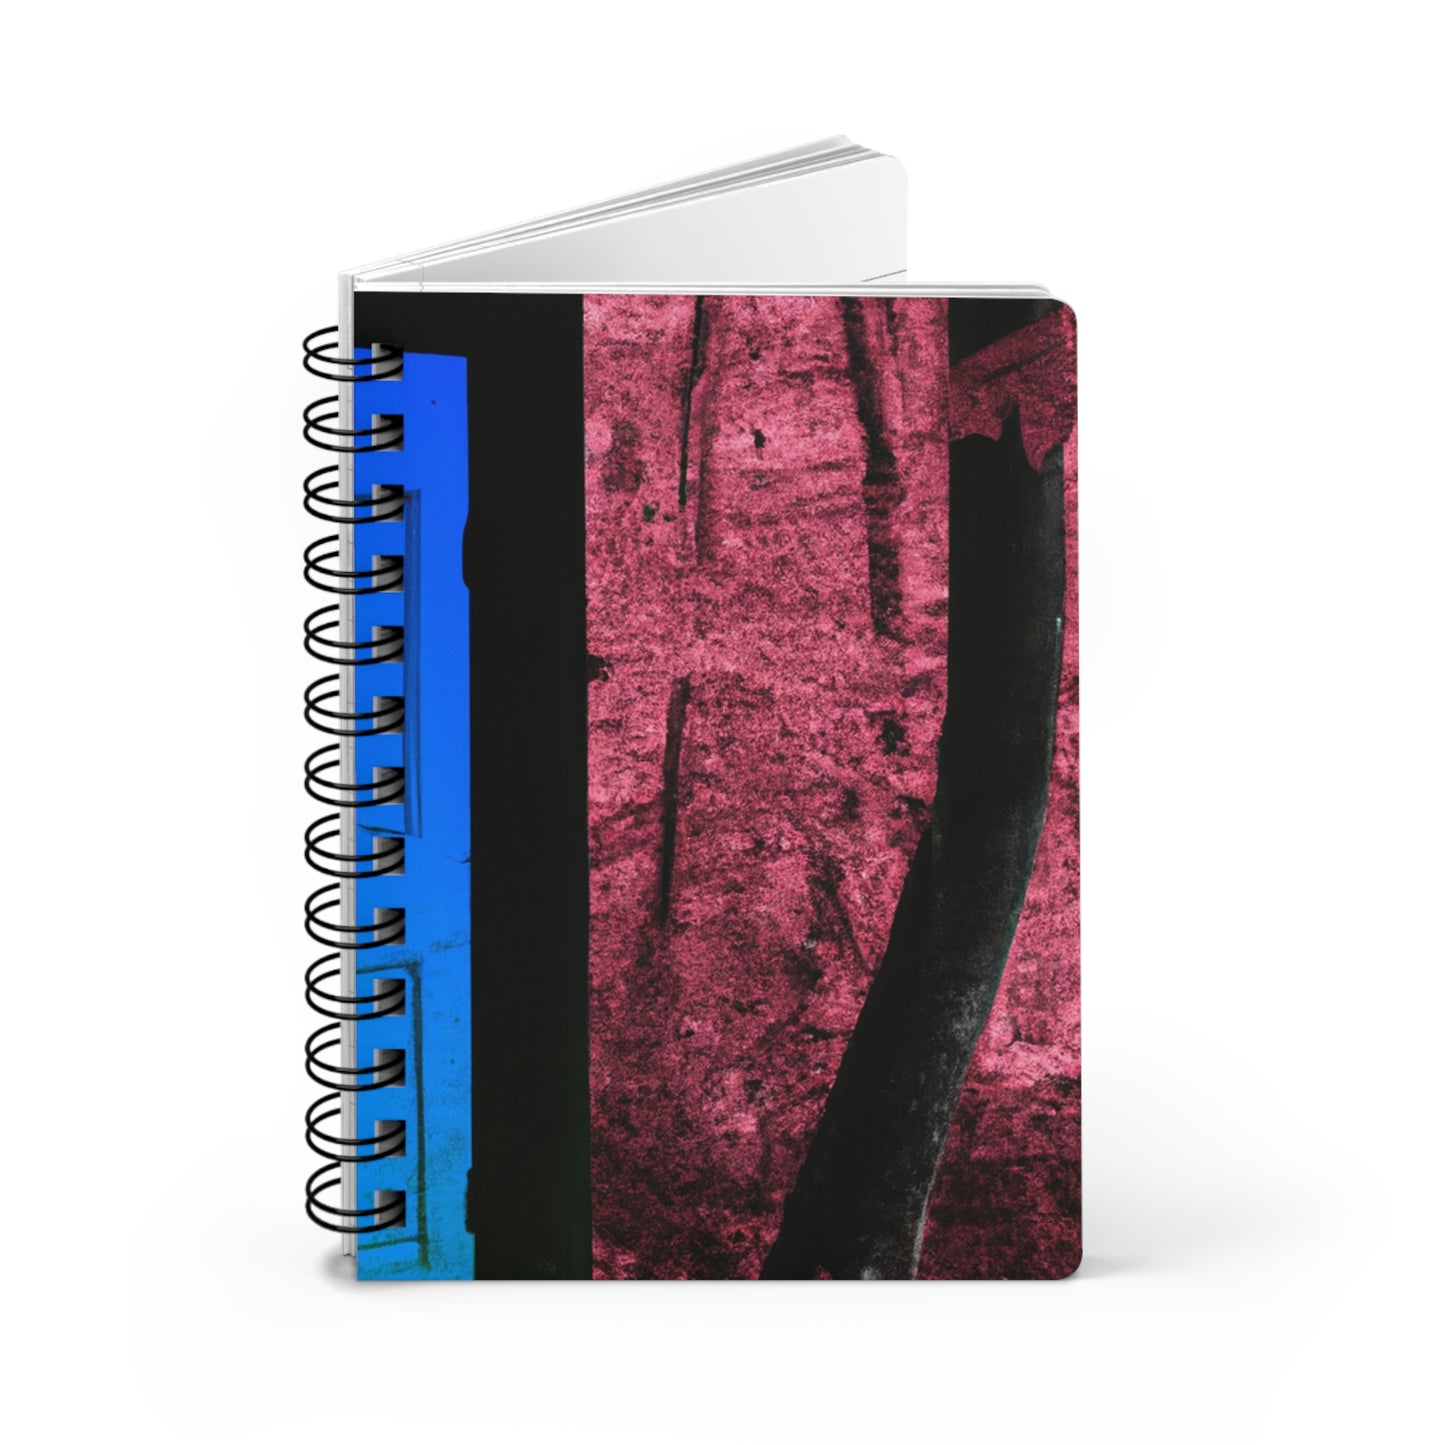 The Enigmatic Door of the Forest - The Alien Spiral Bound Journal